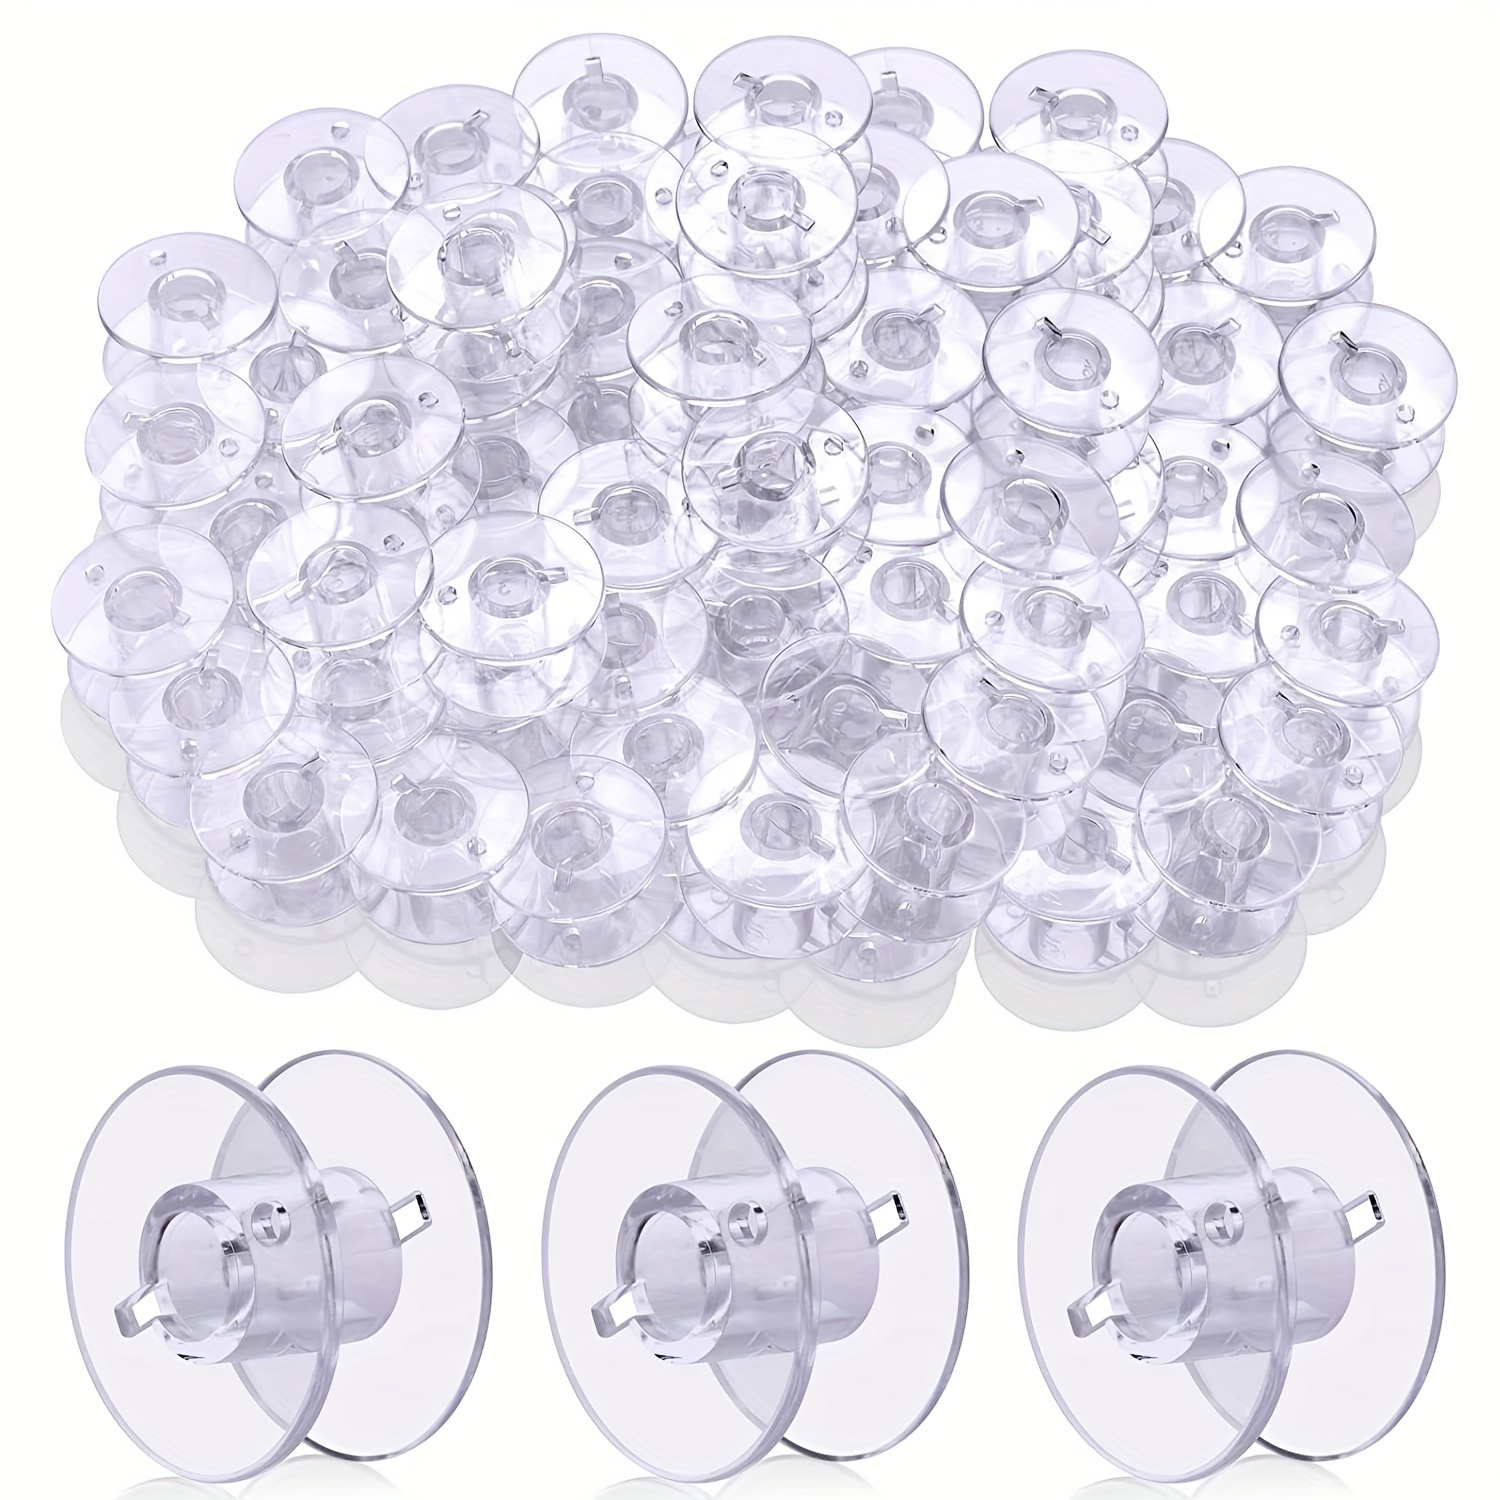 

50 Pack Clear Plastic Sewing Machine Bobbins Class 15, Sewing Bobbins Compatible For Brother Singer Janome Kenmore Machines Style Sa156 Transparent Bobbins Spools Embroidery Bobbins Sewing Accessories